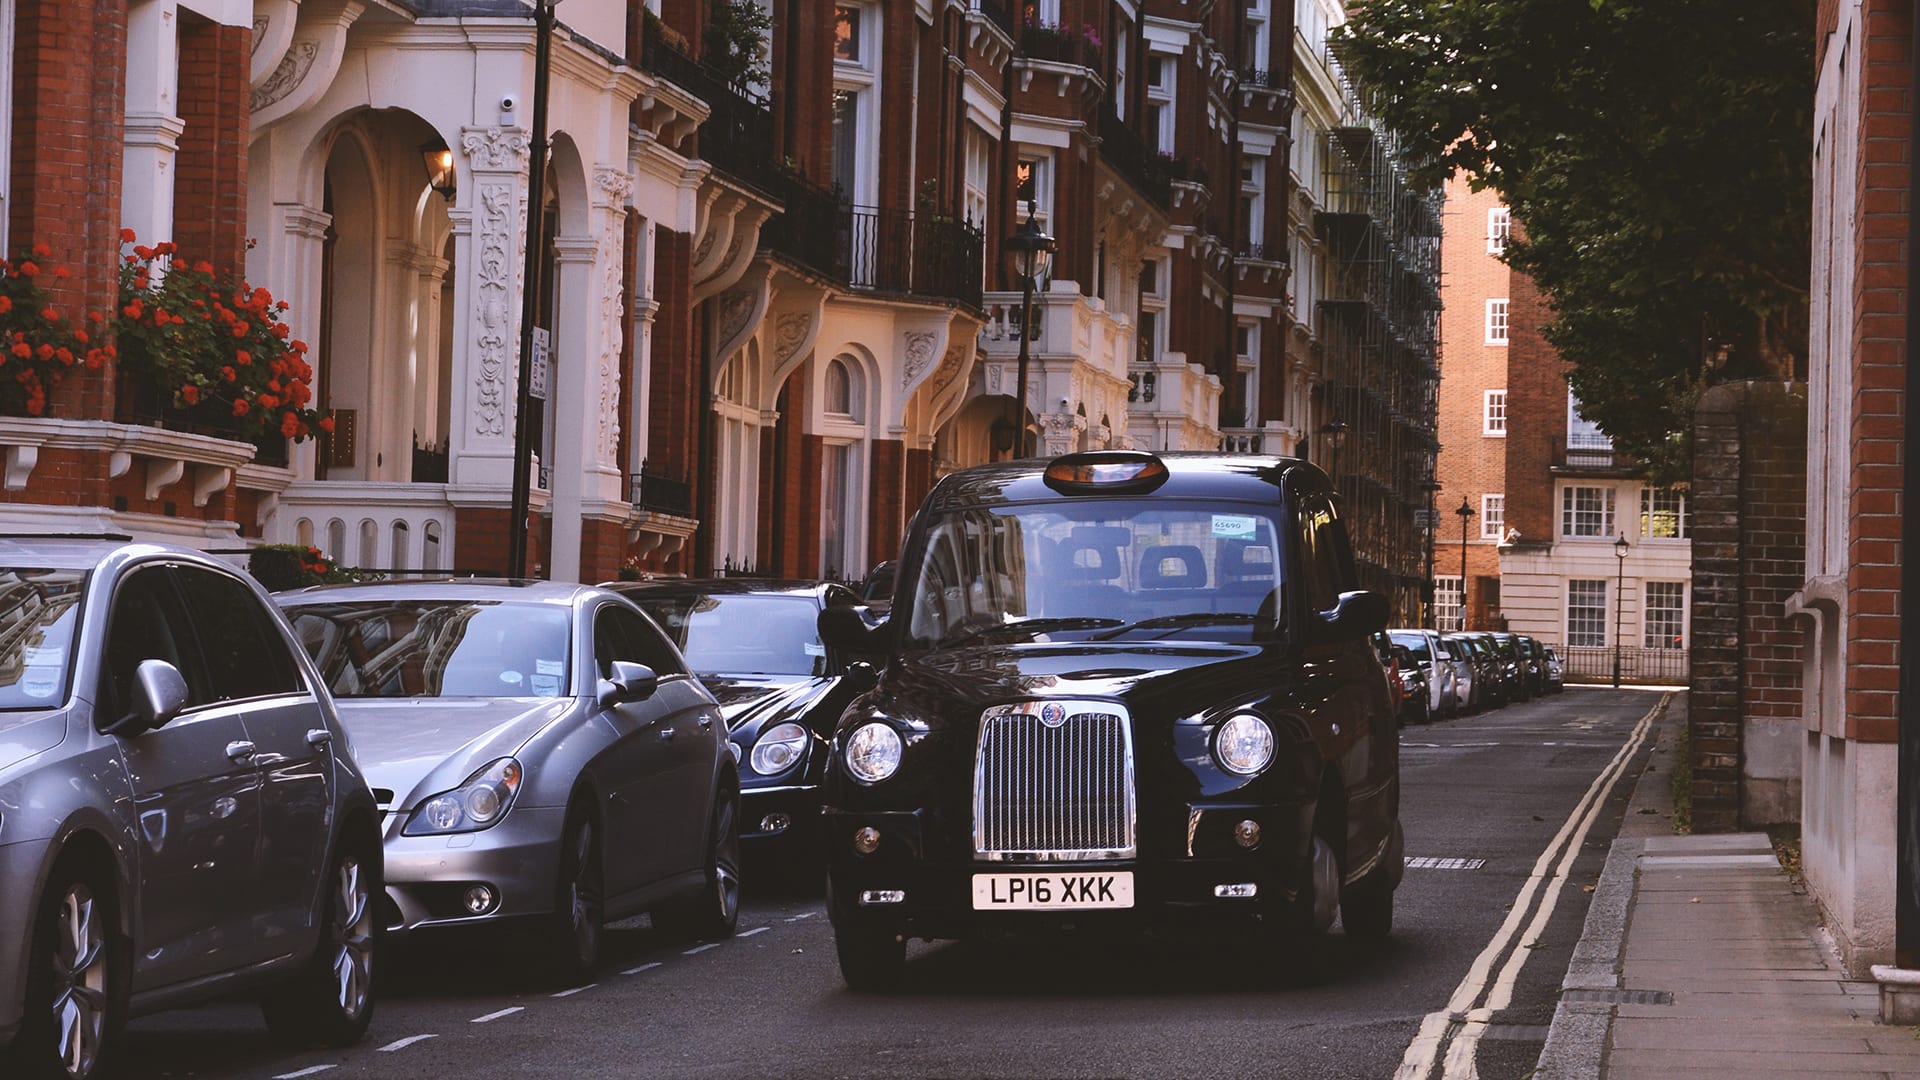 Uber just lost its license to operate in London